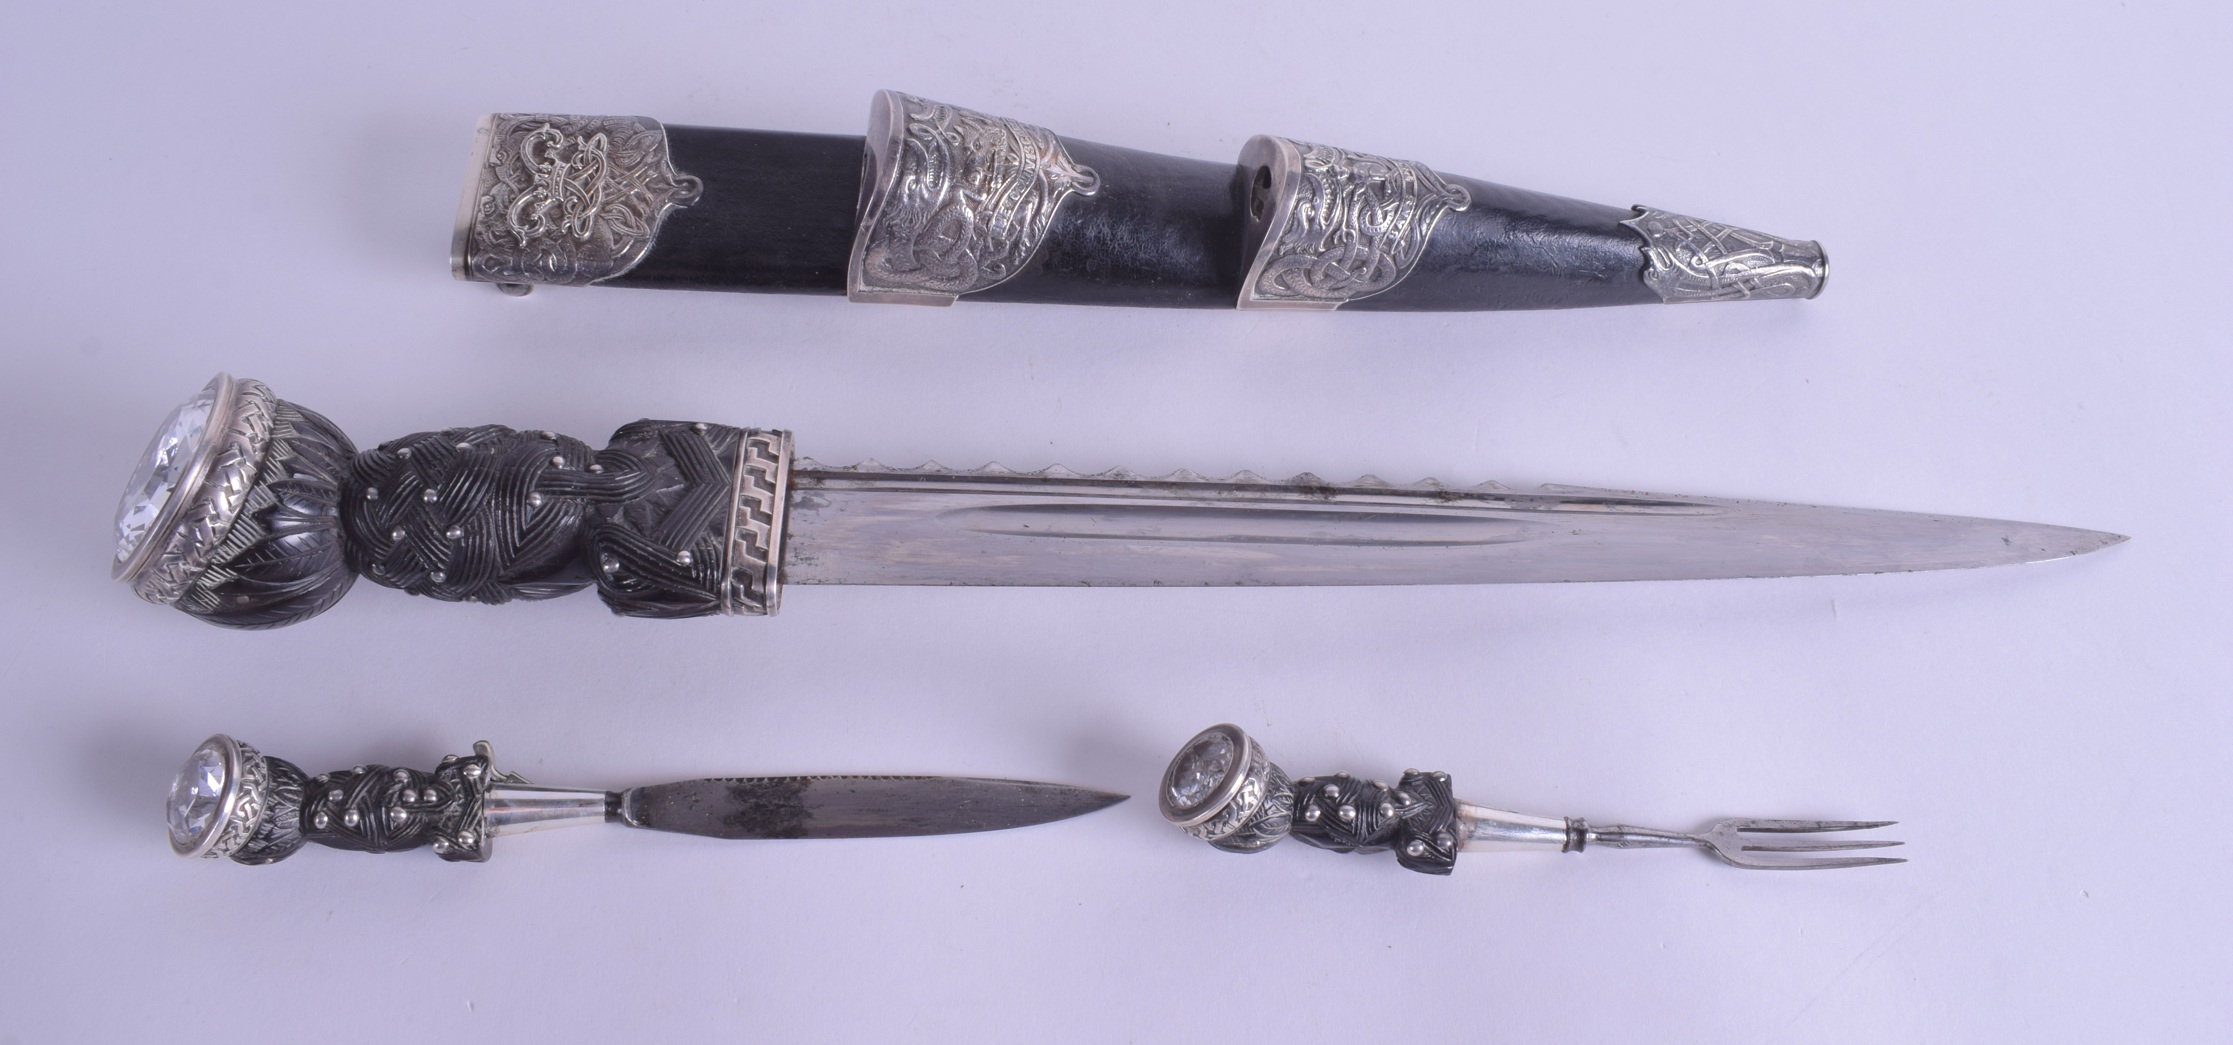 A LATE 19TH CENTURY SCOTTISH WHITE METAL ROYAL SCOTS OFFICERS DIRK DAGGER by R & HB Kirkwood of Edin